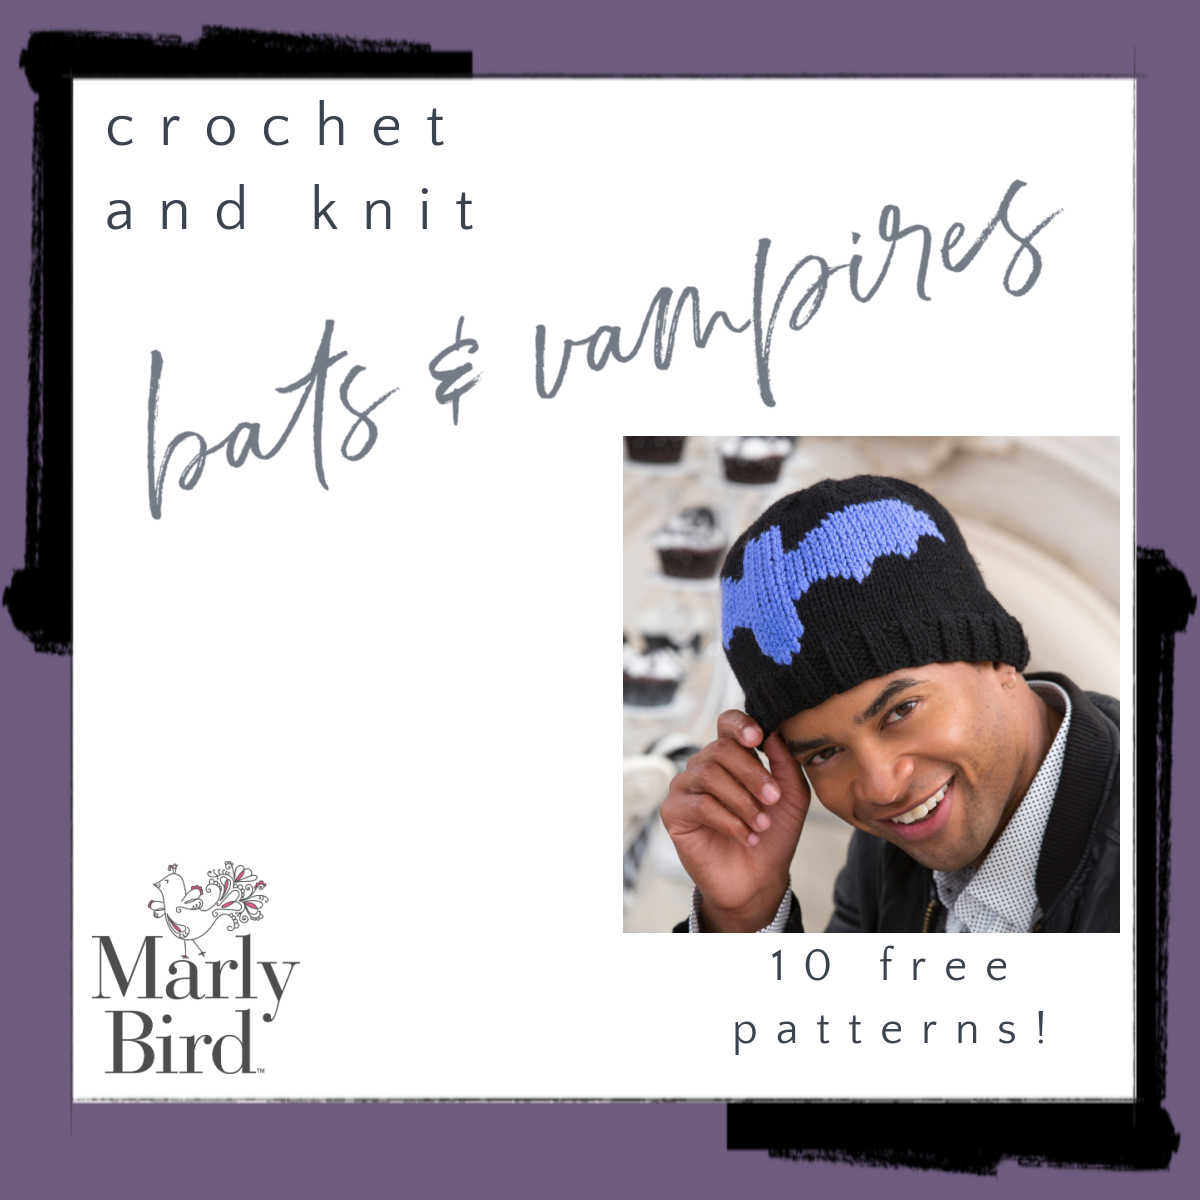 10 Free Bats and Vampire Knit and Crochet Projects